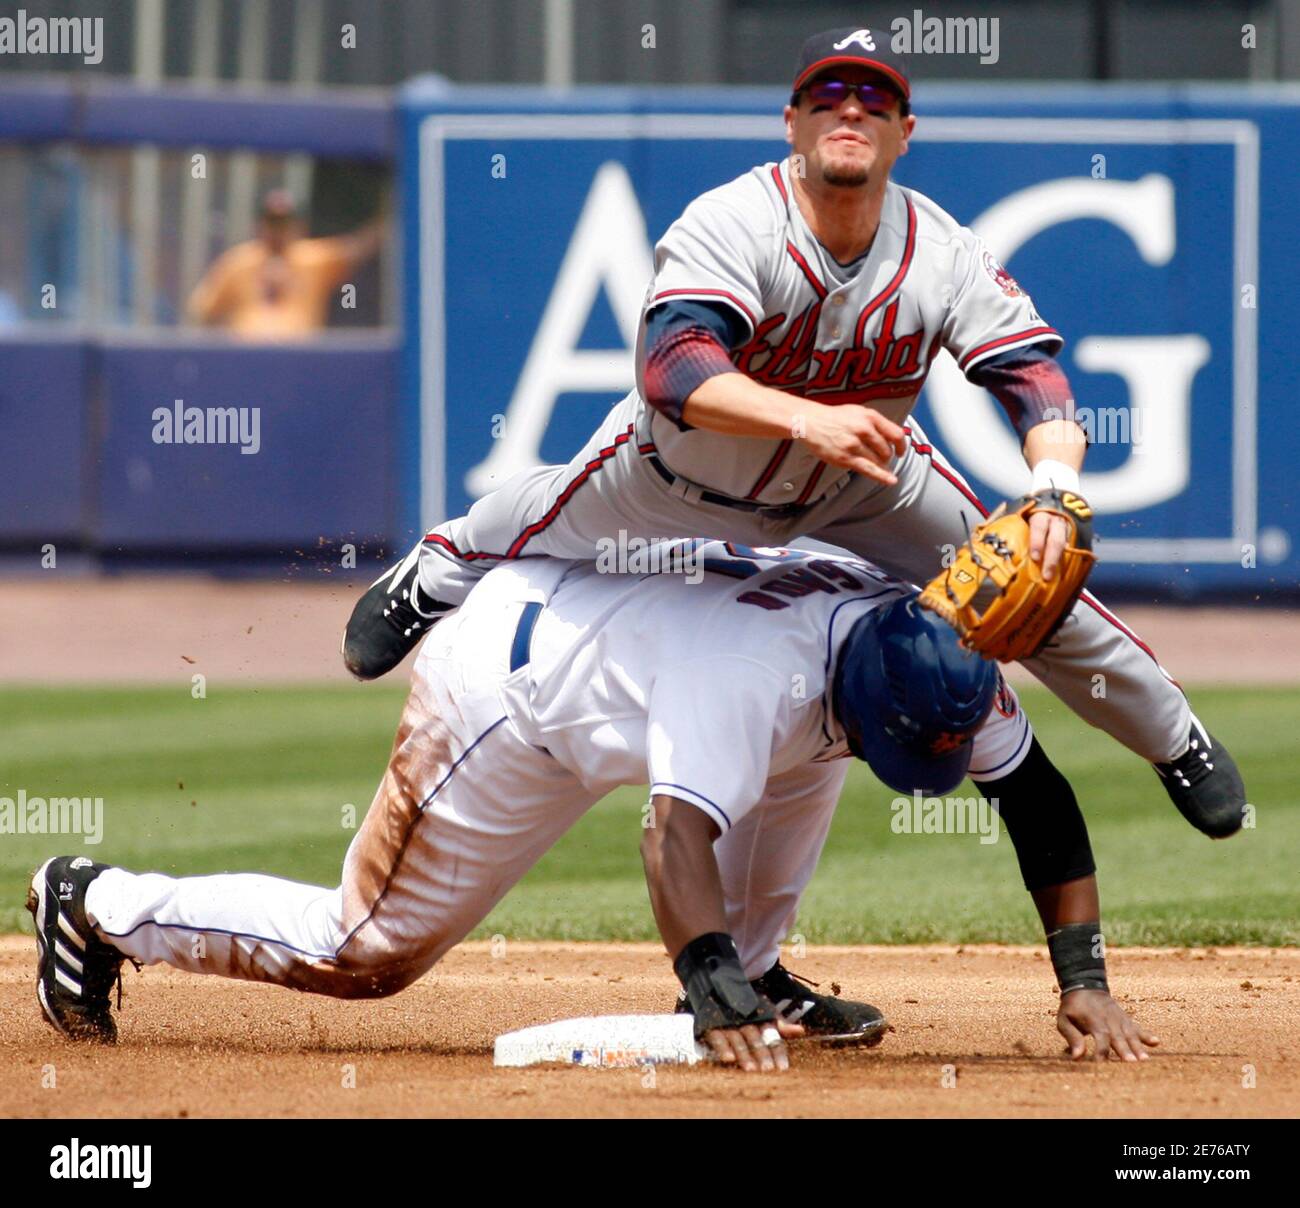 New York Mets runner Carlos Degado (bottom) tries to upend Atlanta Braves second baseman Marcus Giles and break up a double play in the first inning of their MLB game in New York, May 6, 2006. Mets batter David Wright was out at first base. REUTERS/Ray Stubblebine Stock Photo